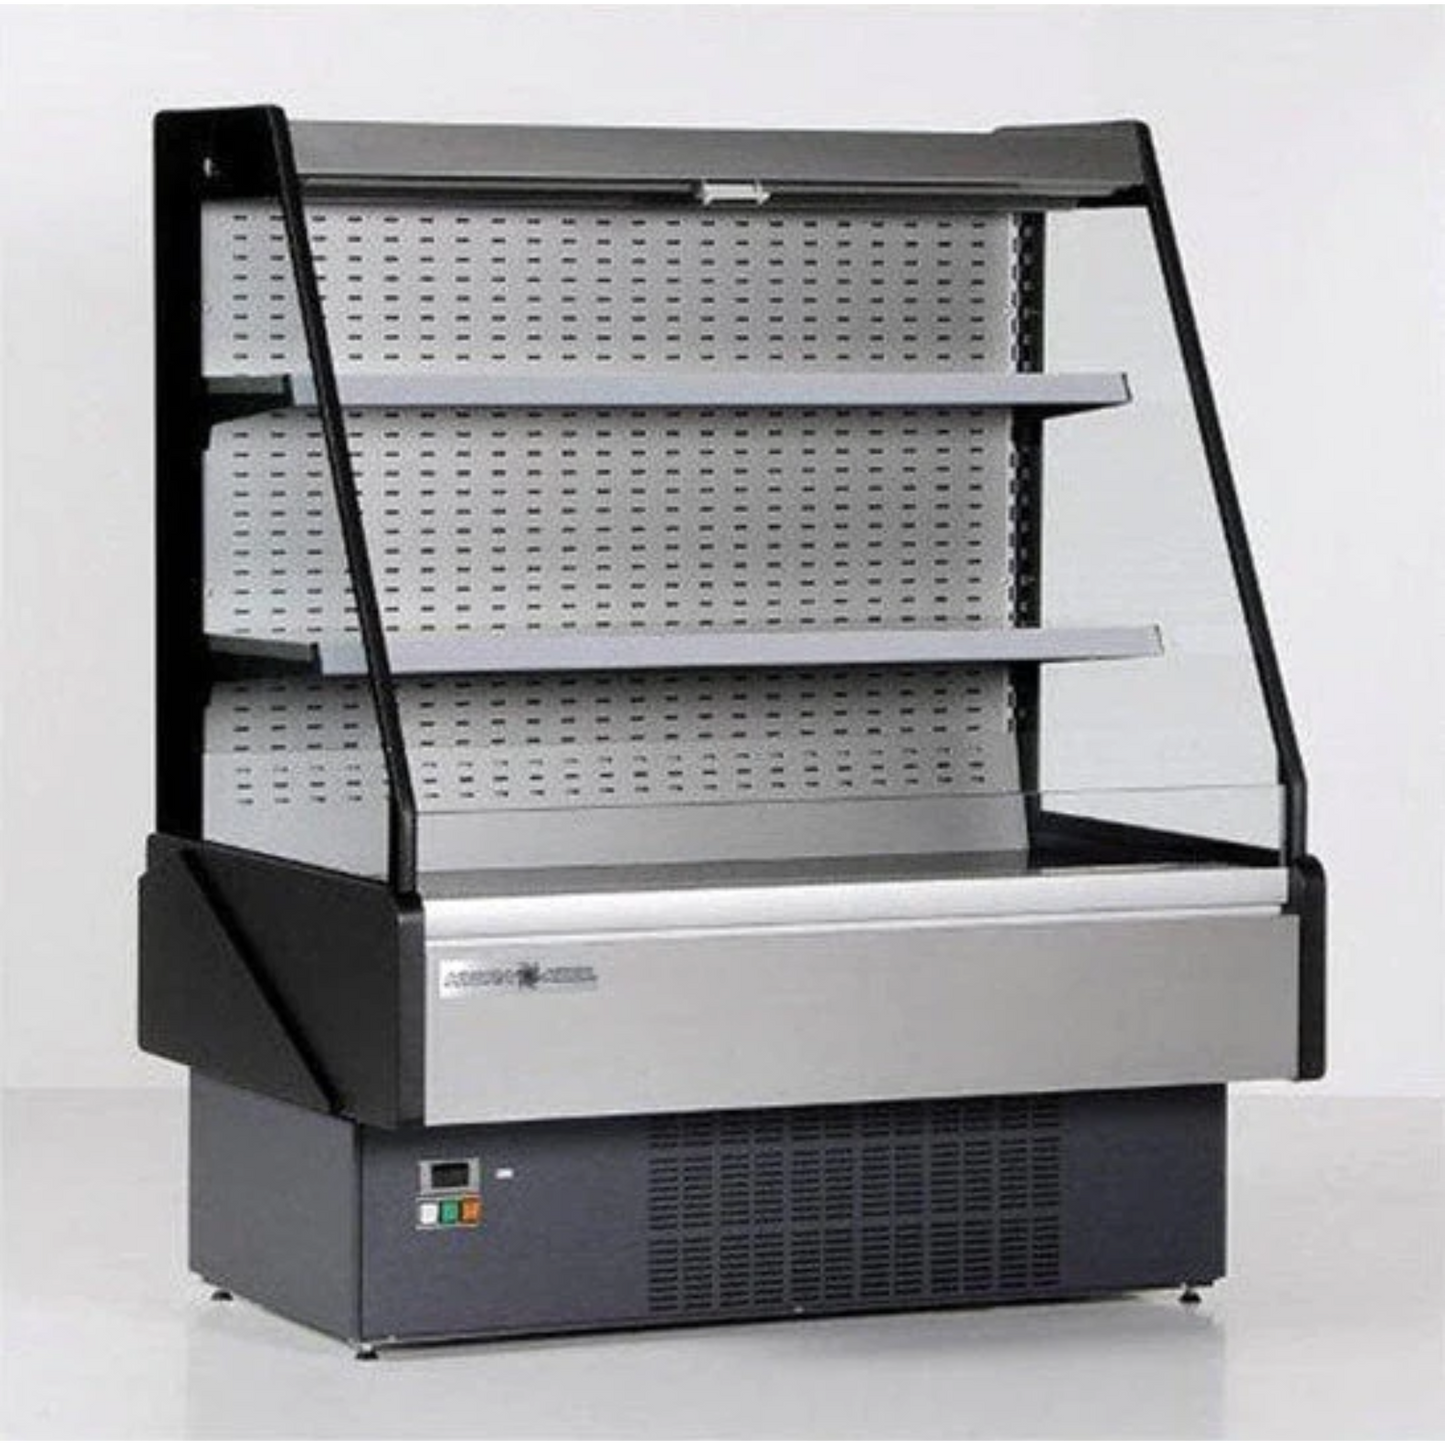 Hydra-Kool KGL-OF-40-S 40" Grab And Go Low Profile Self-Contained